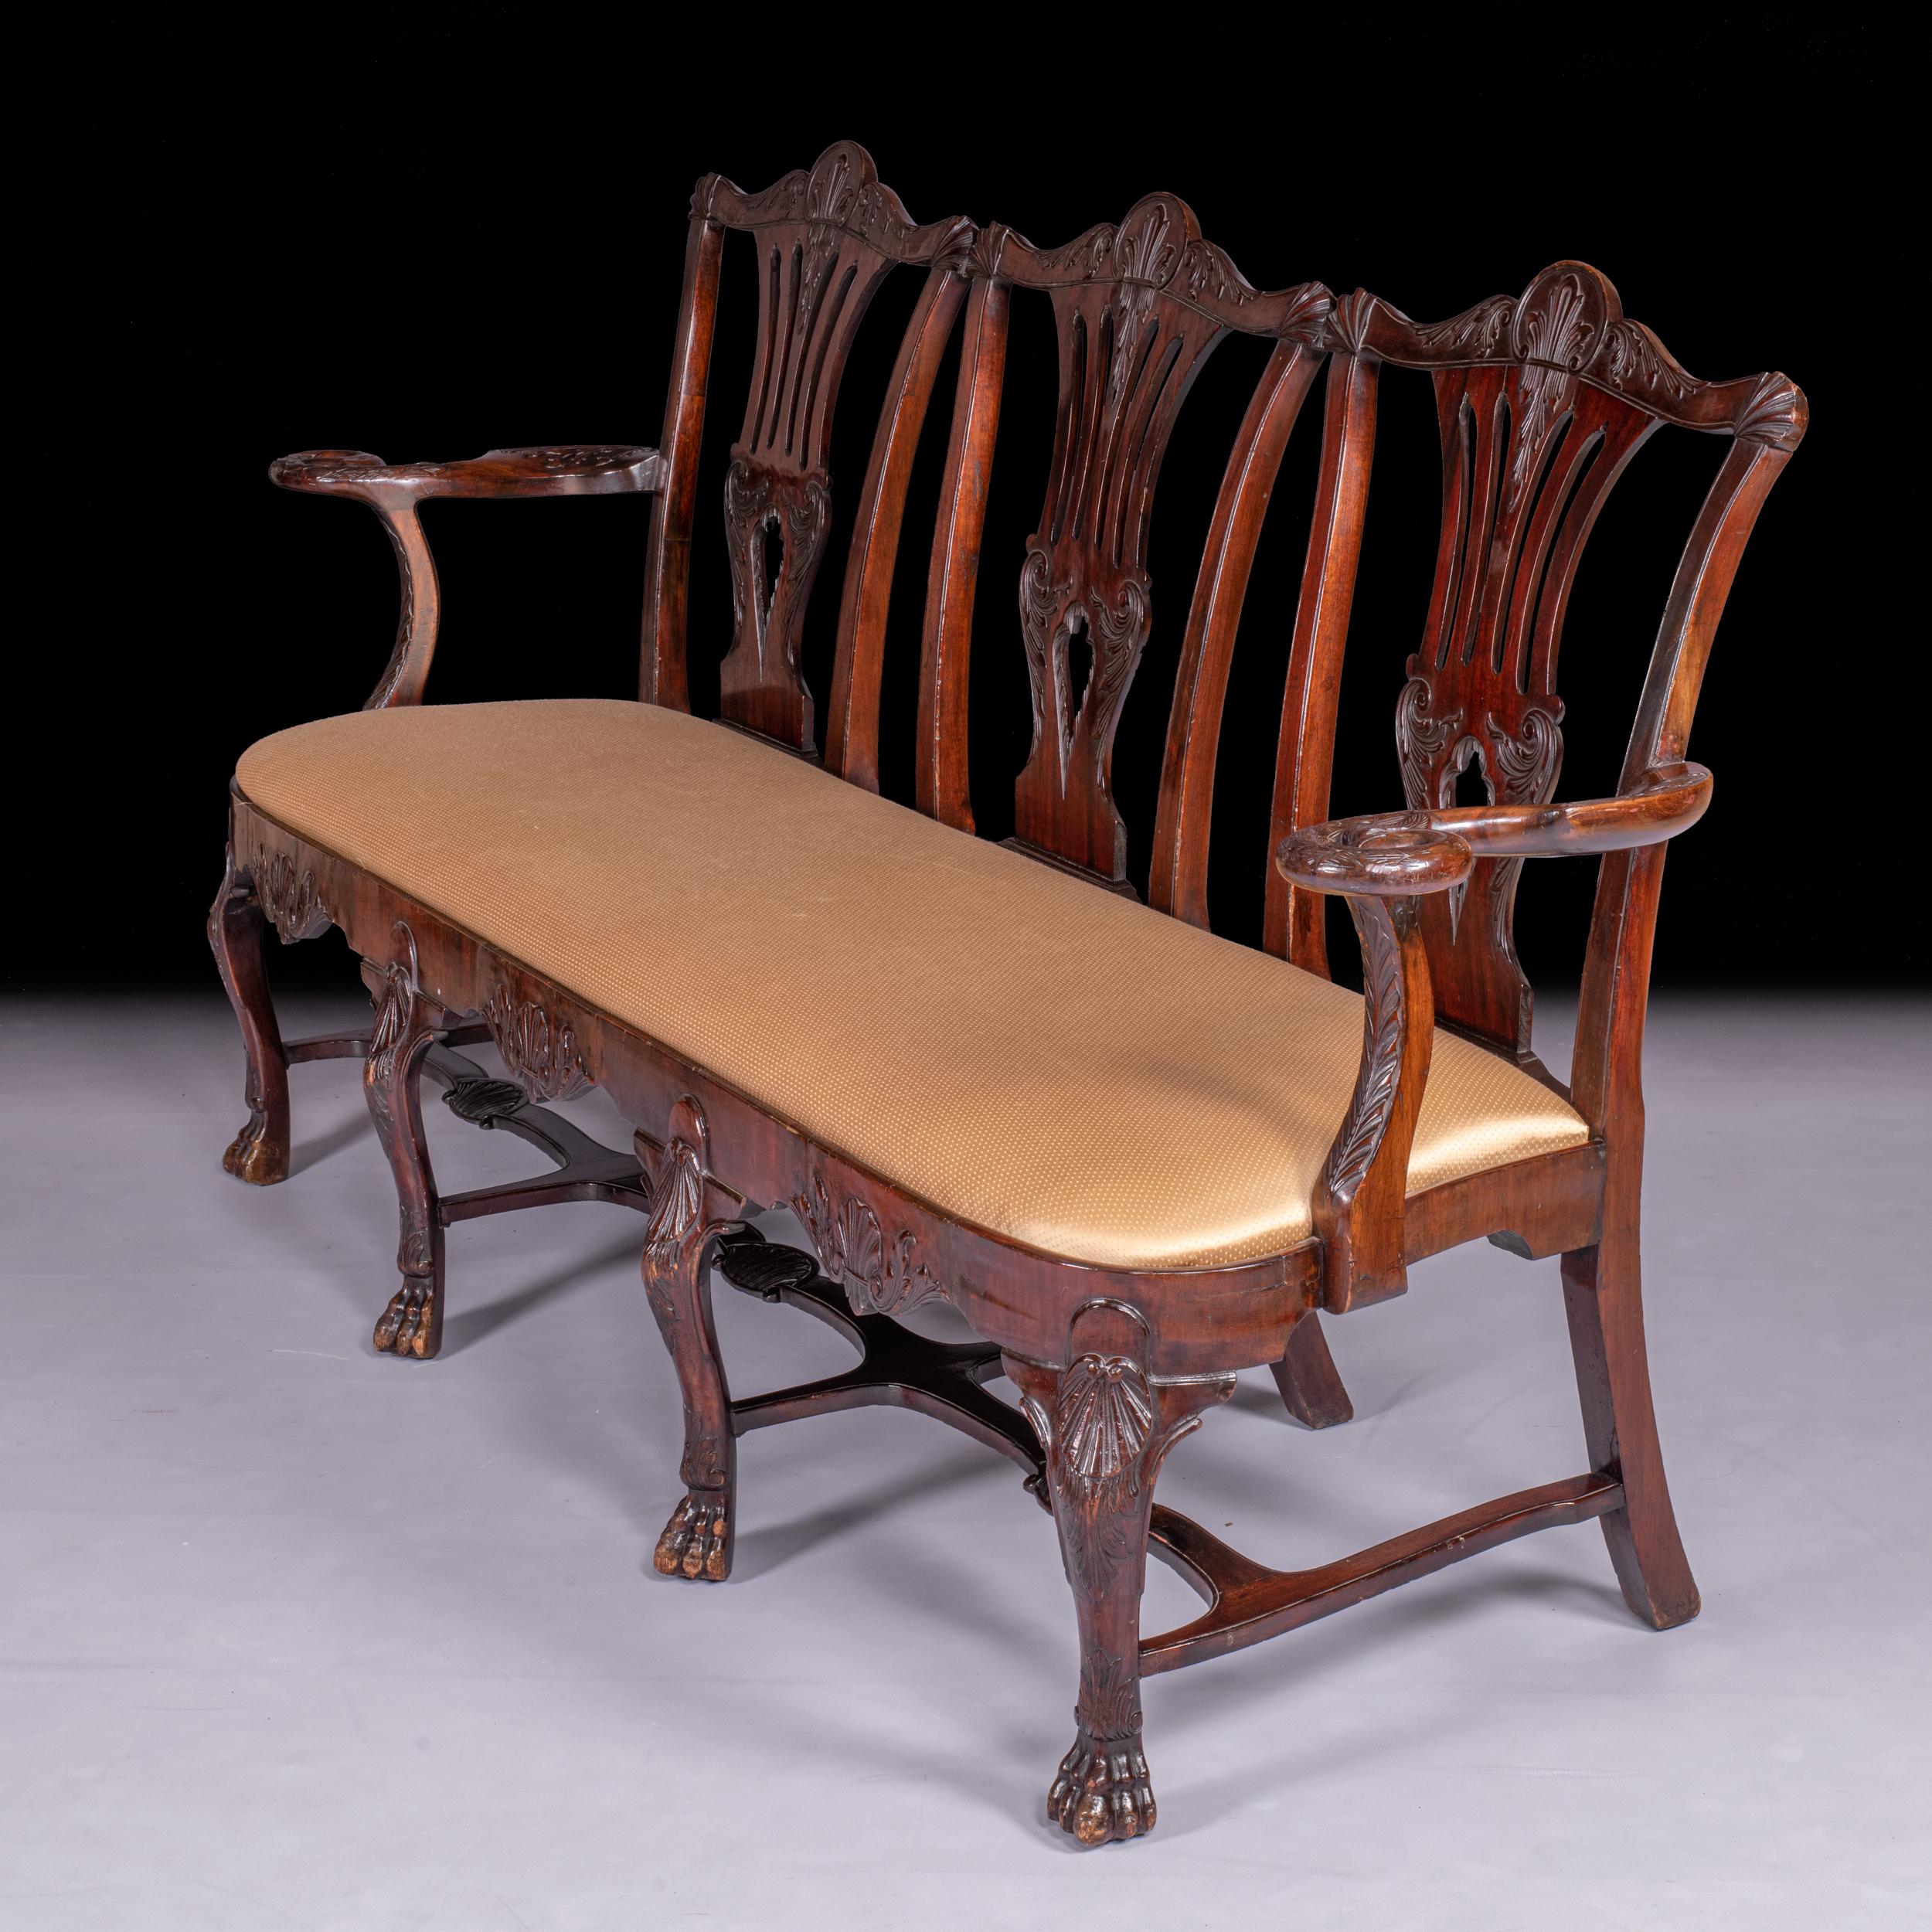 19th Century Irish George III Style Triple Chair Back Settee by Butler of Dublin For Sale 5